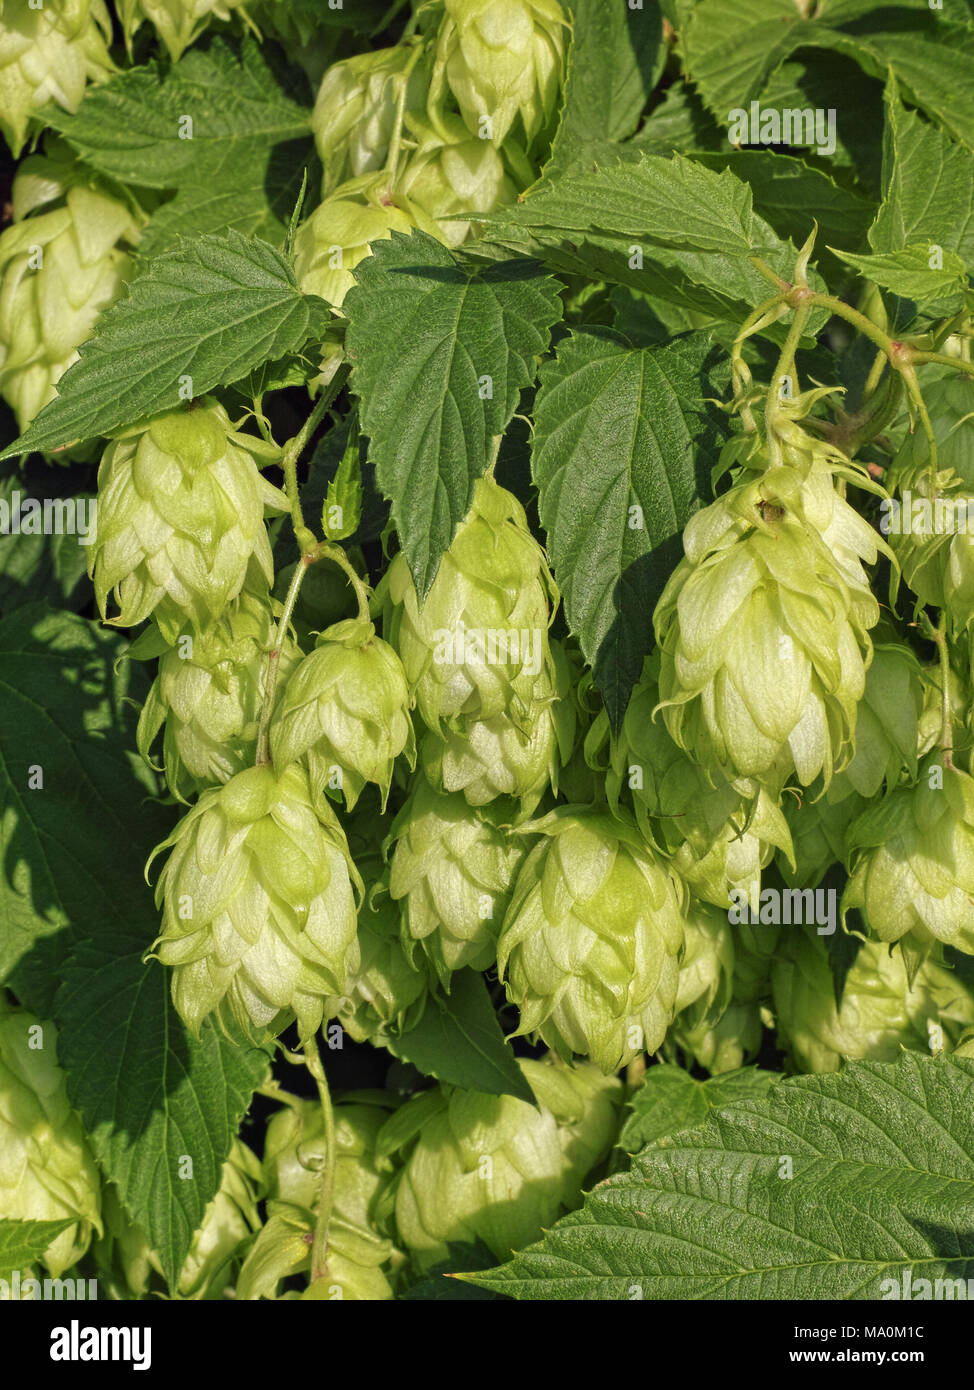 leaves and flowers of common hop plant Stock Photo